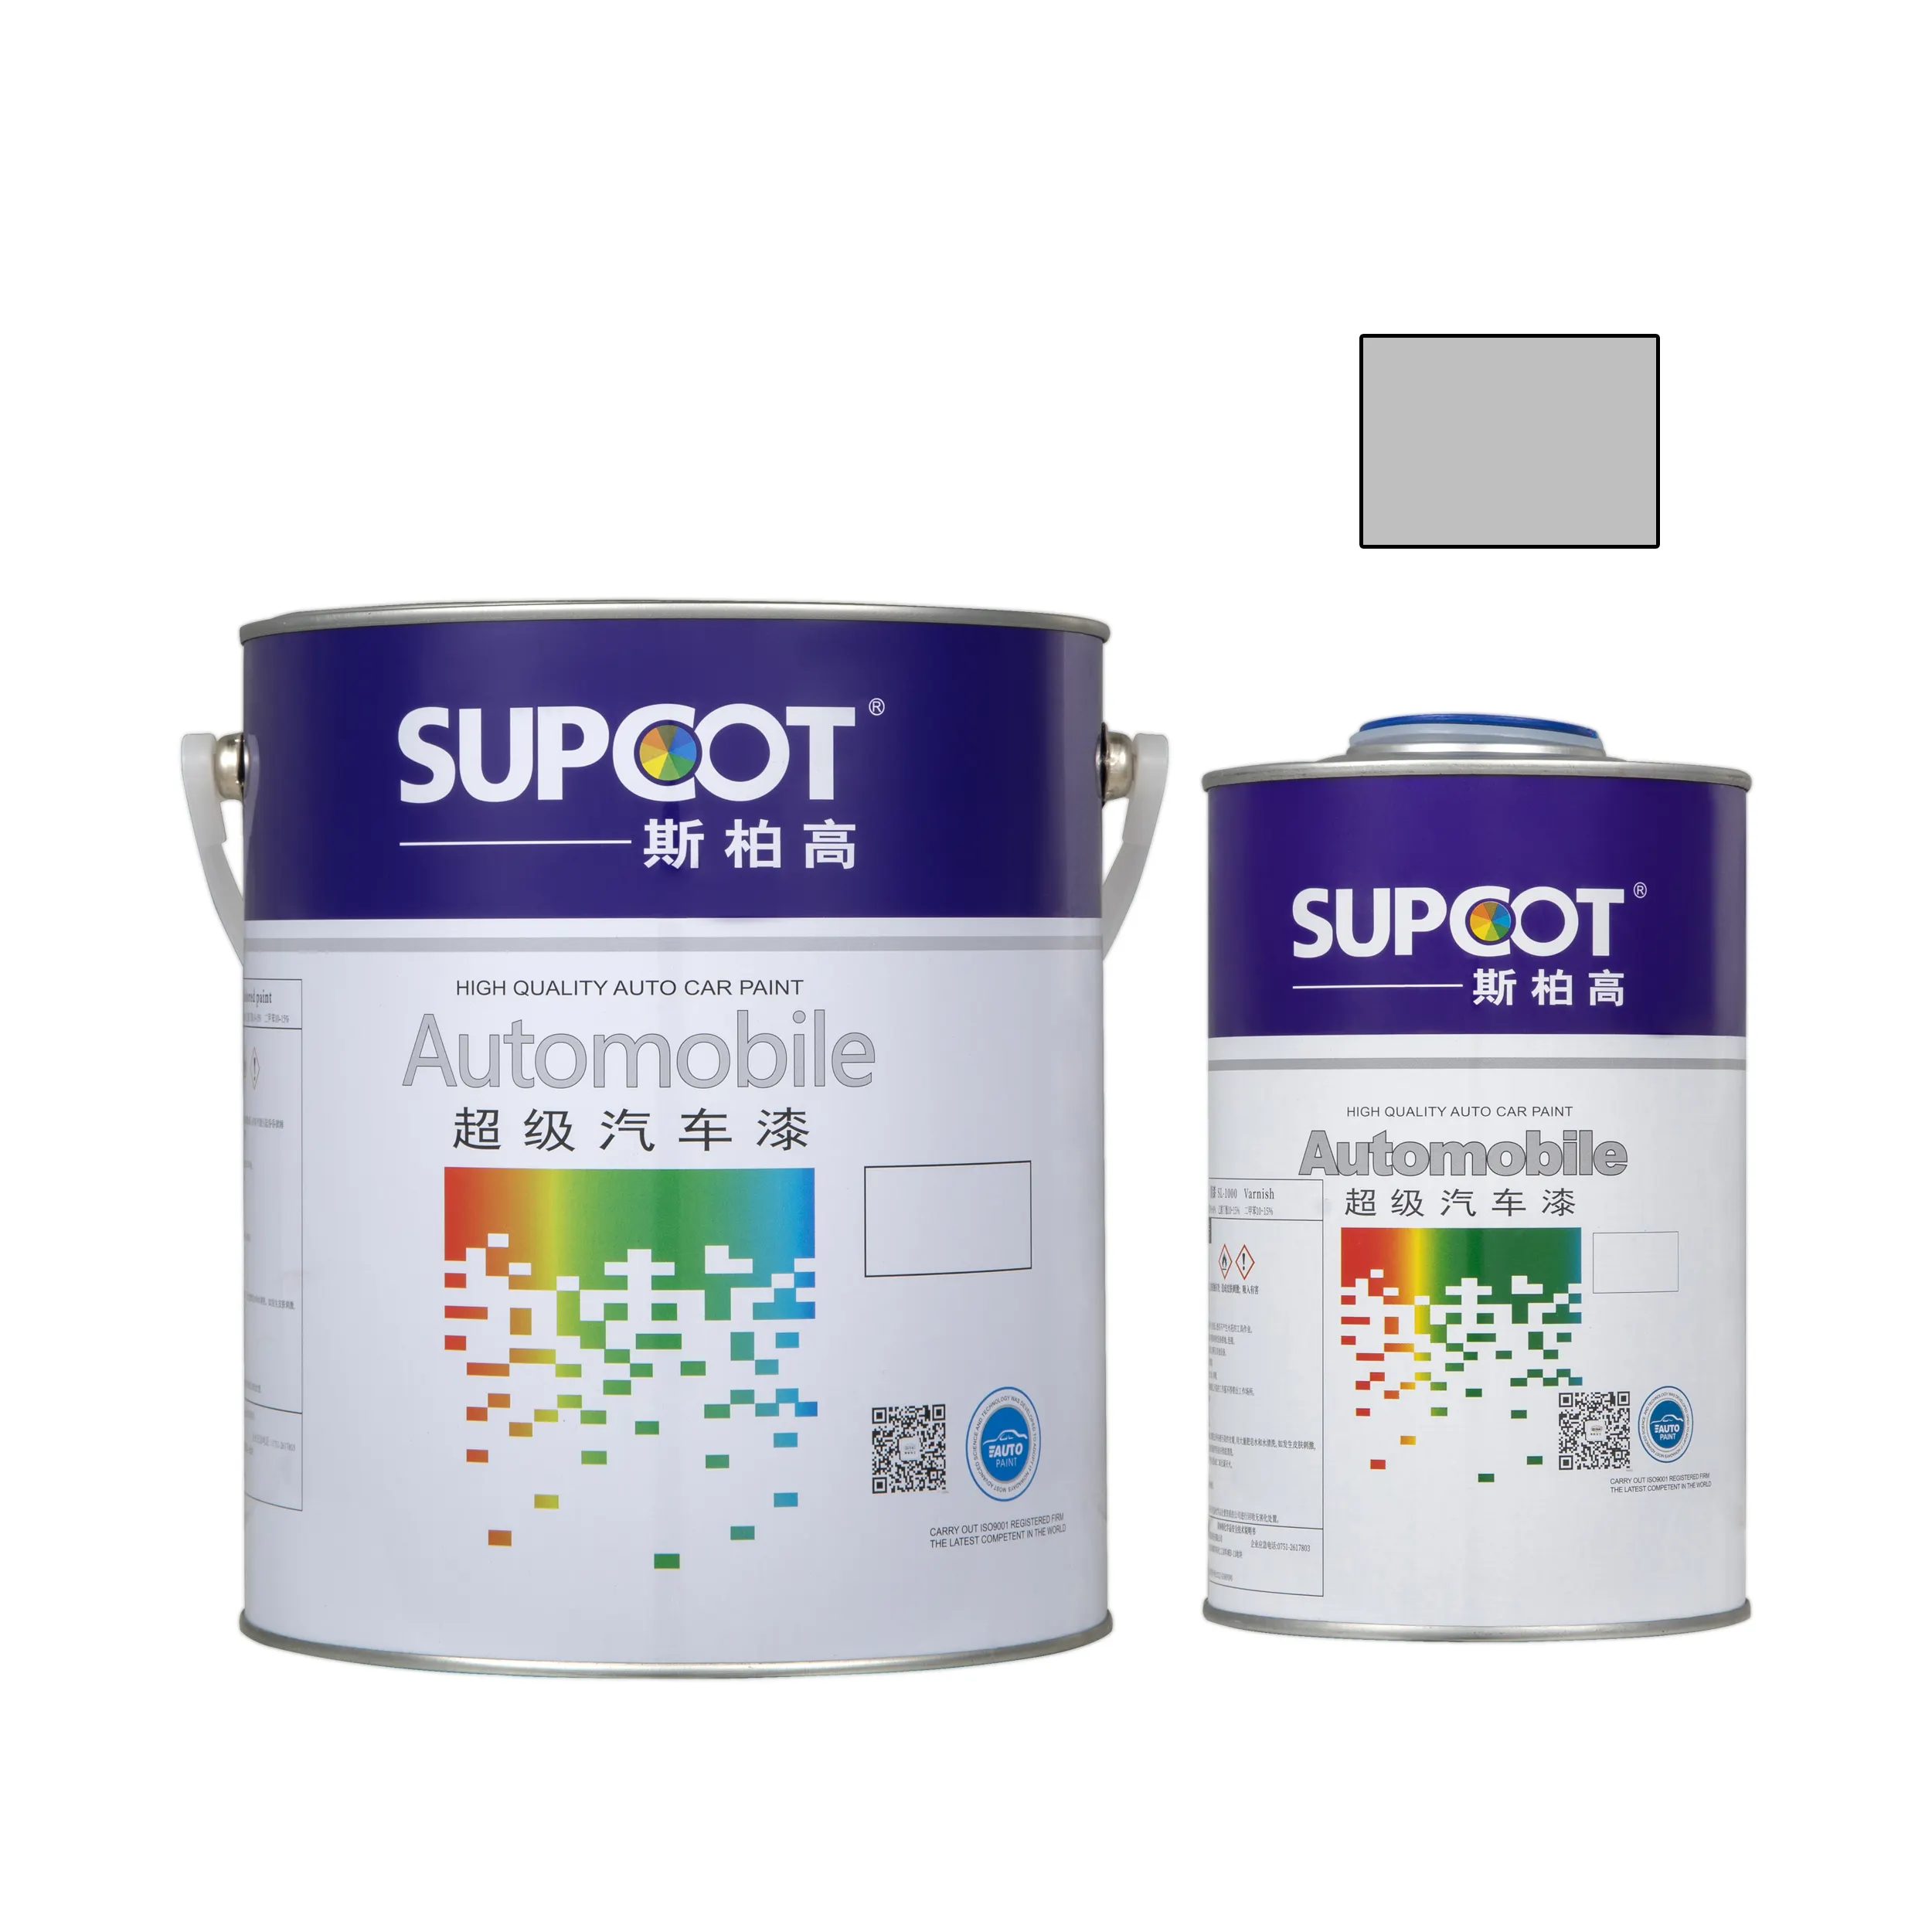 High Quality 2k Automotive Primer Sells Well In China Auto Paint With Good Price